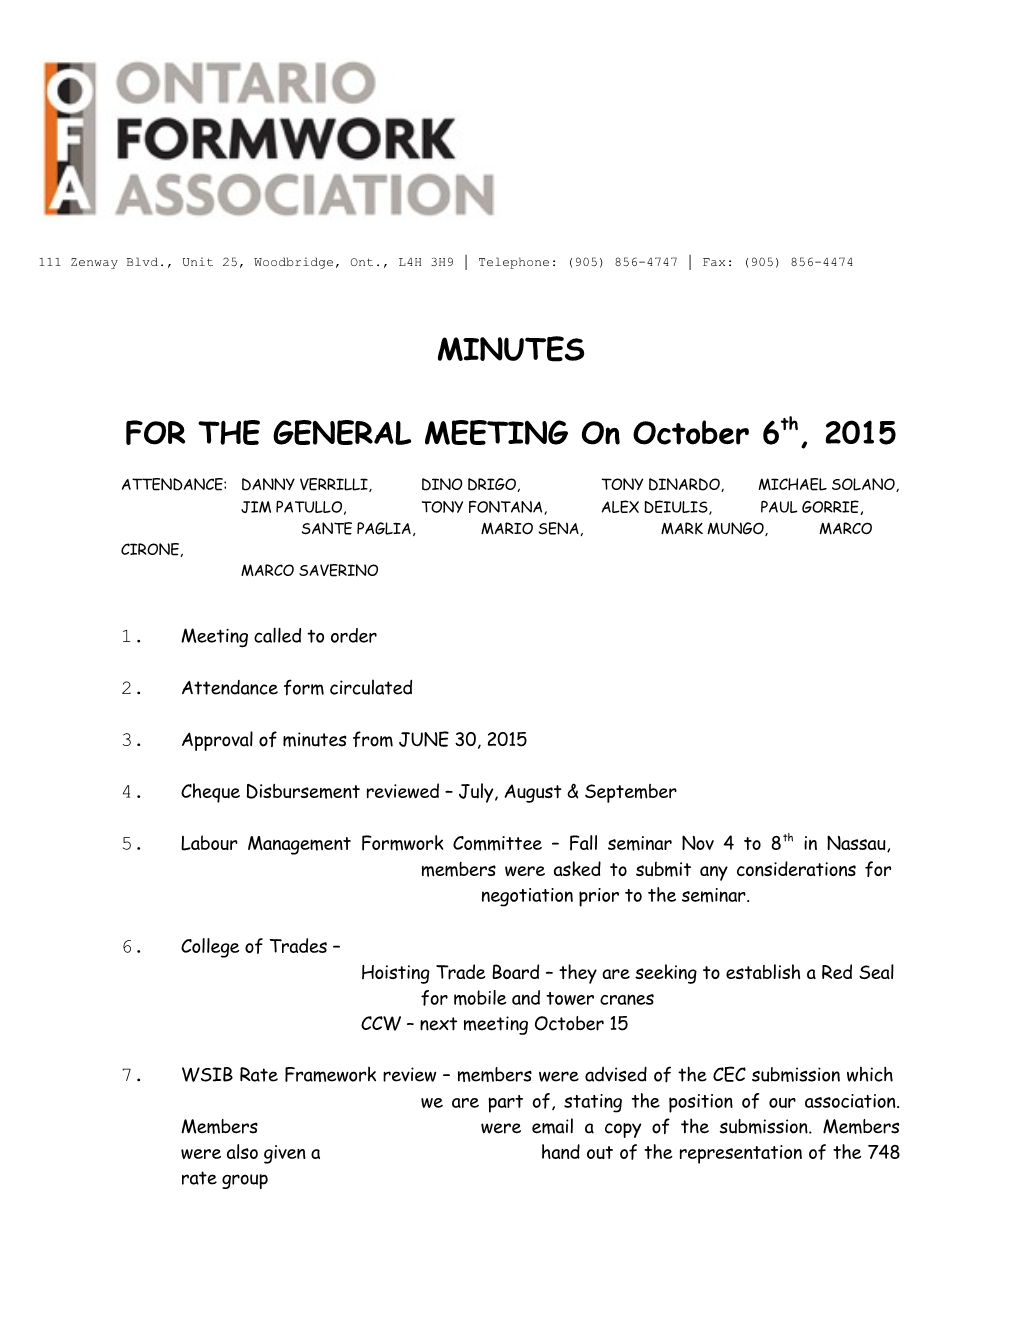 FOR the GENERAL MEETING Onoctober6th, 2015